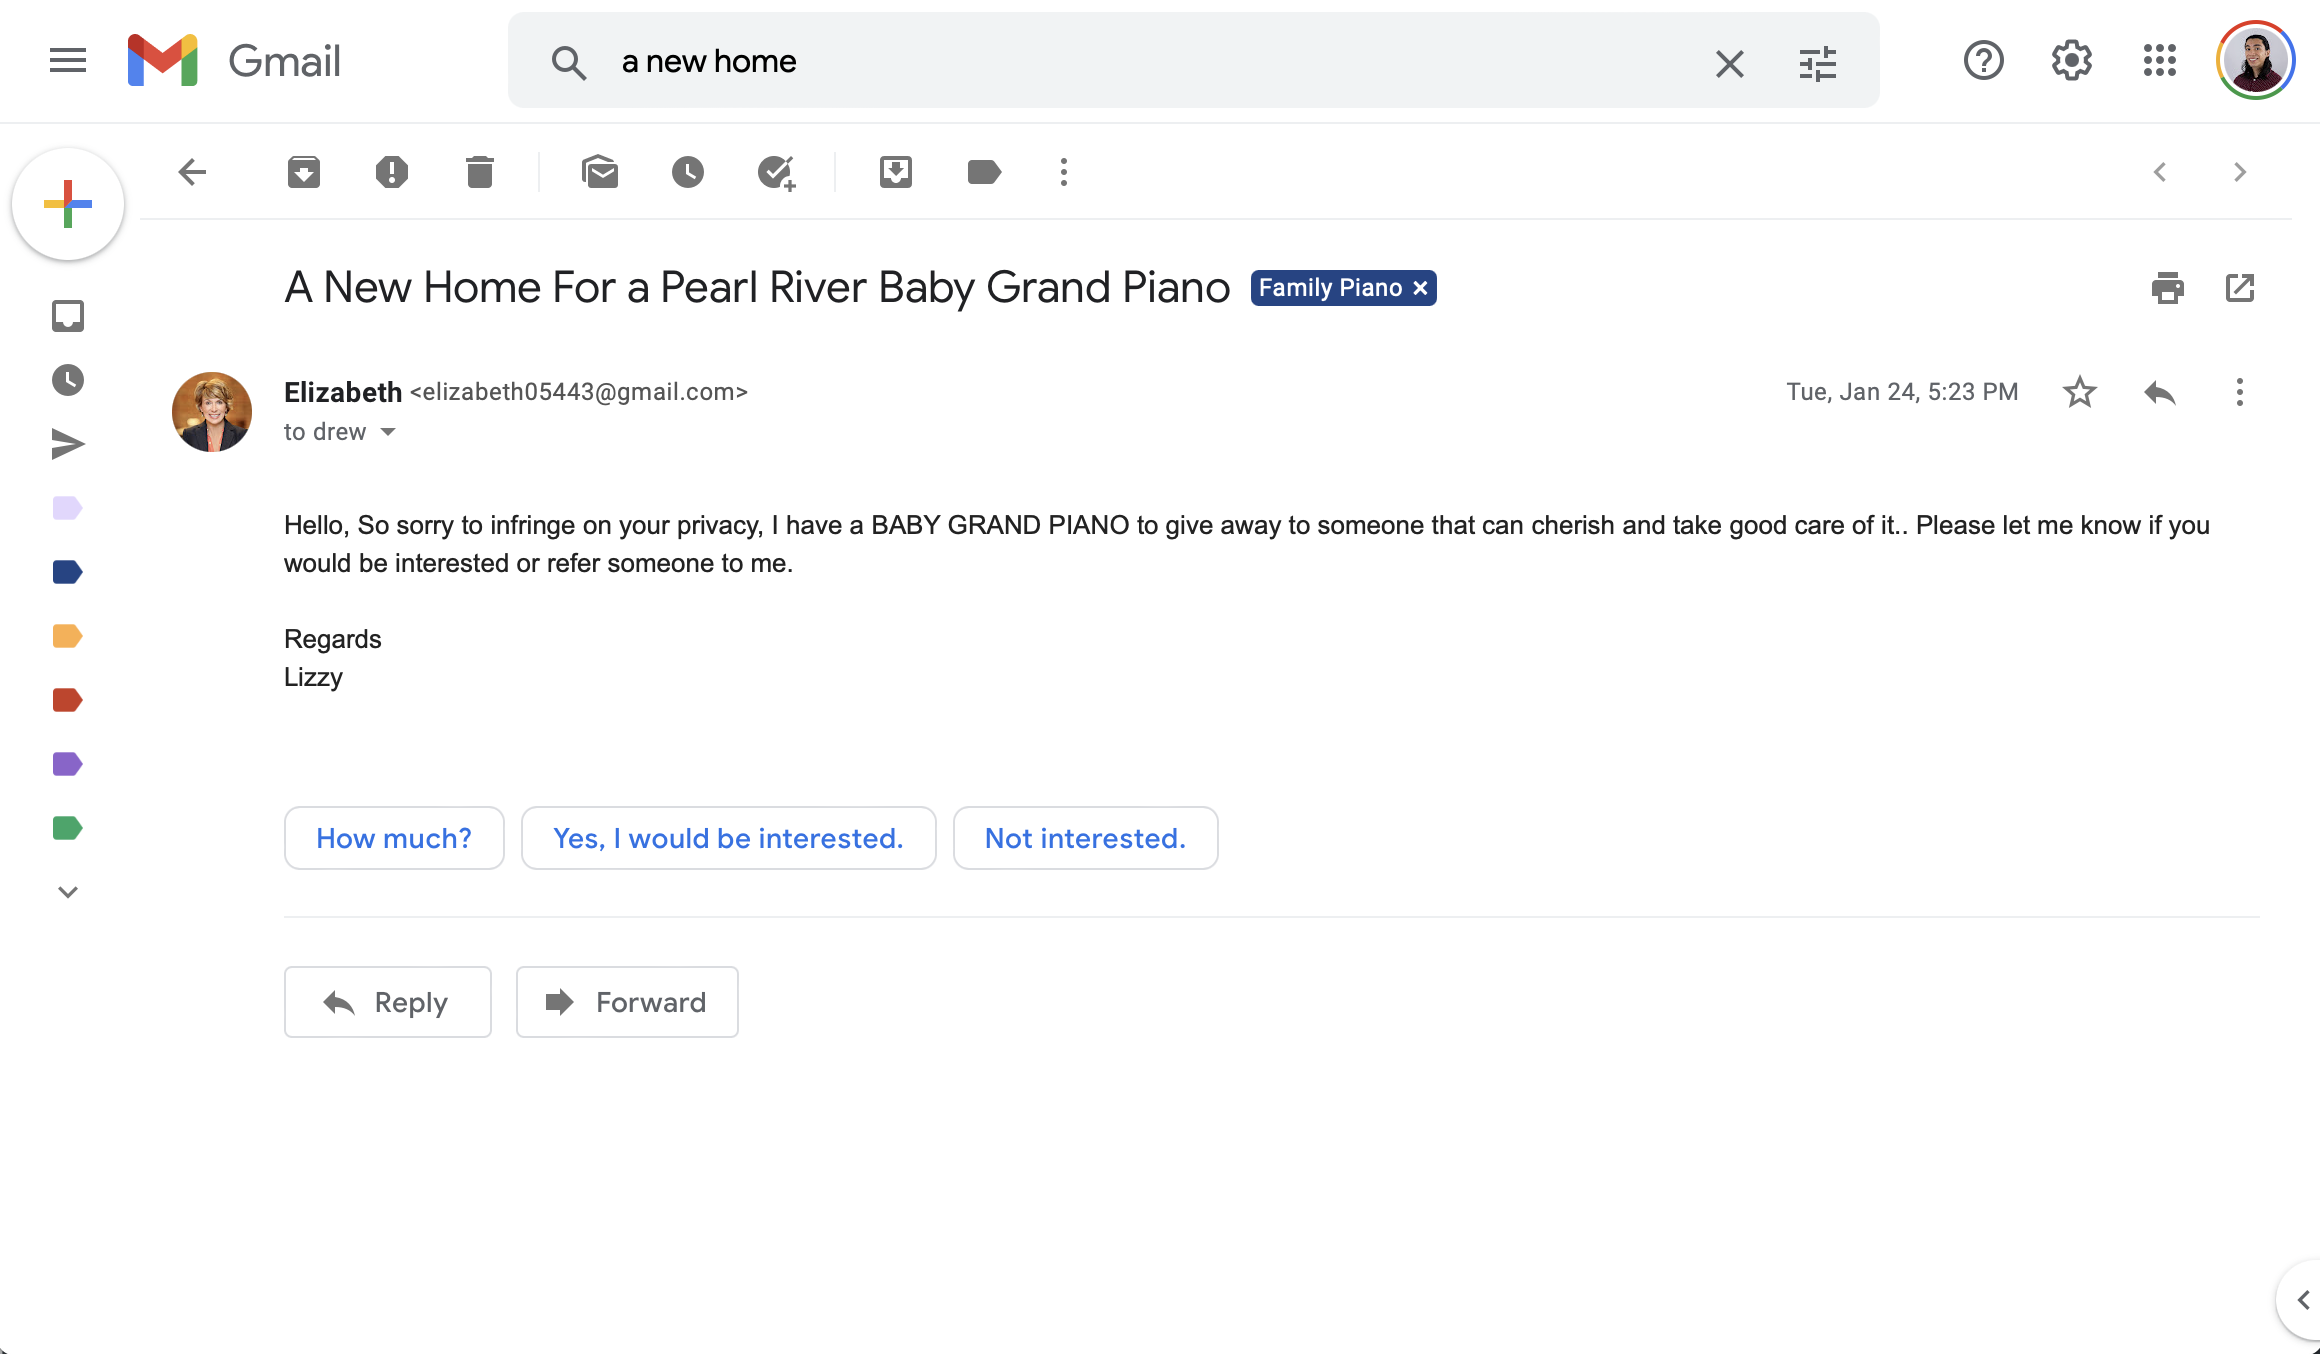 Email "A New Home for a Pearl River Baby Grand Piano" that notes a scammer has a "BABY GRAND PIANO to give away"